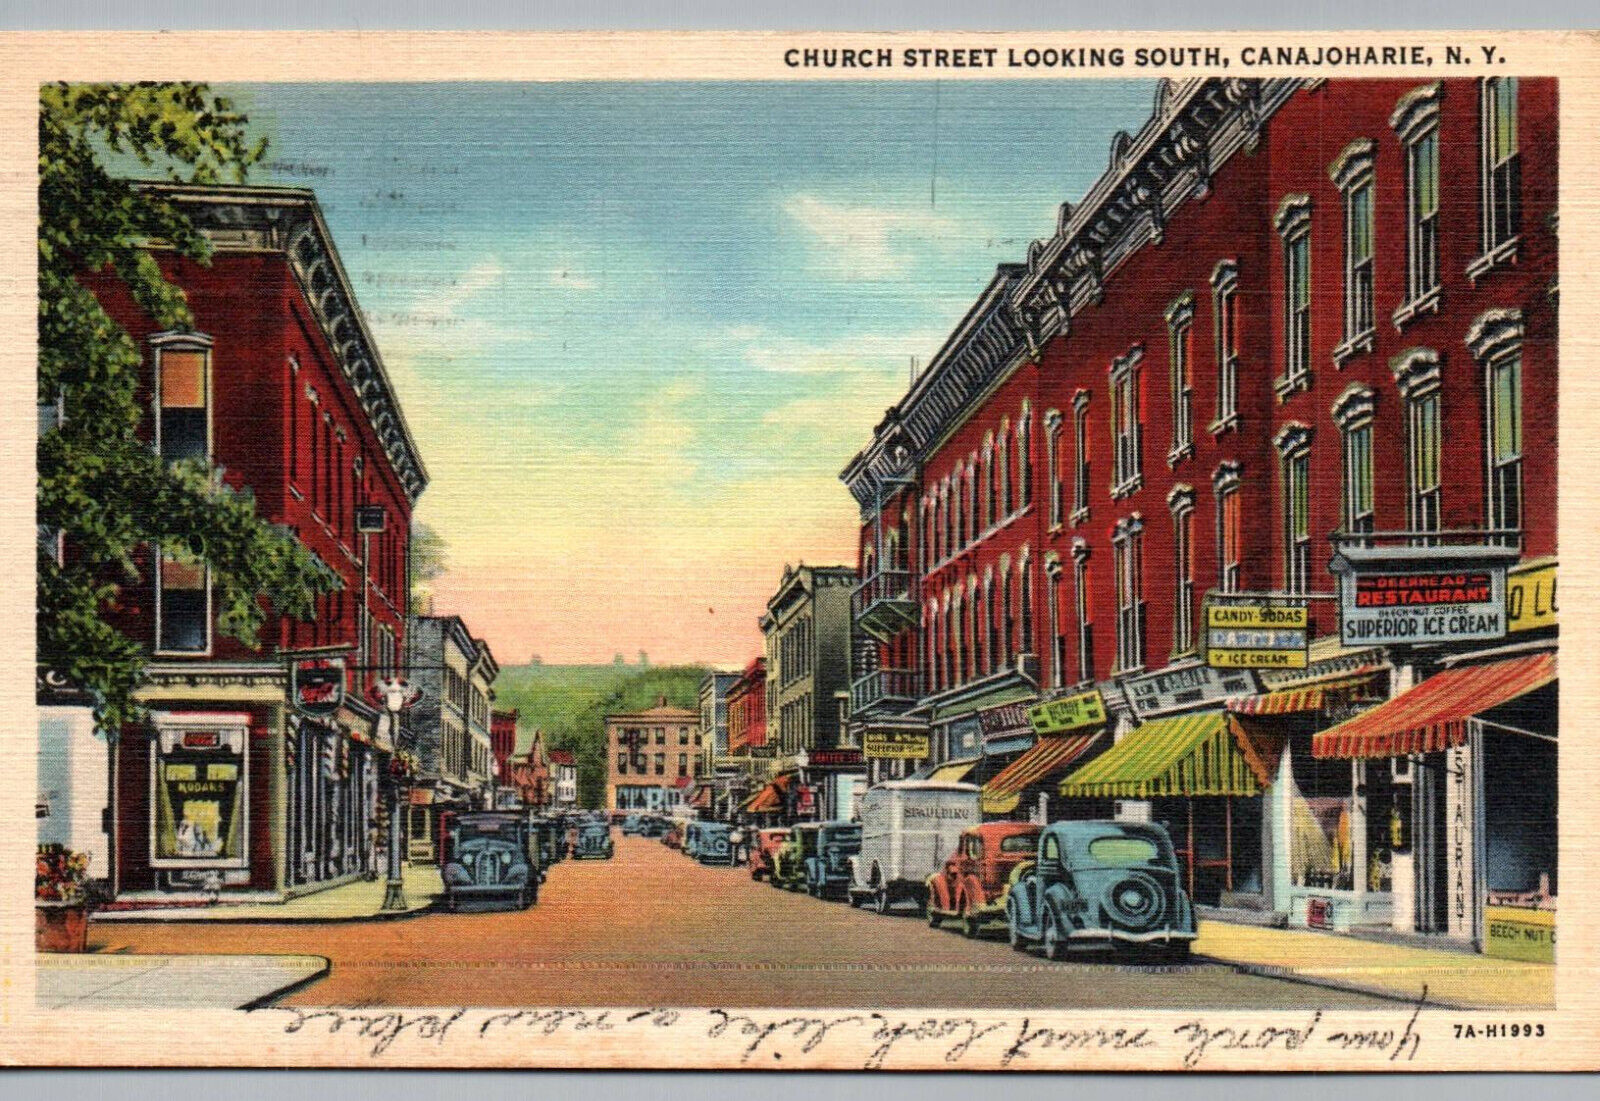 Canajoharie NY Church Street Looking South 1938 Posted New York Postcard